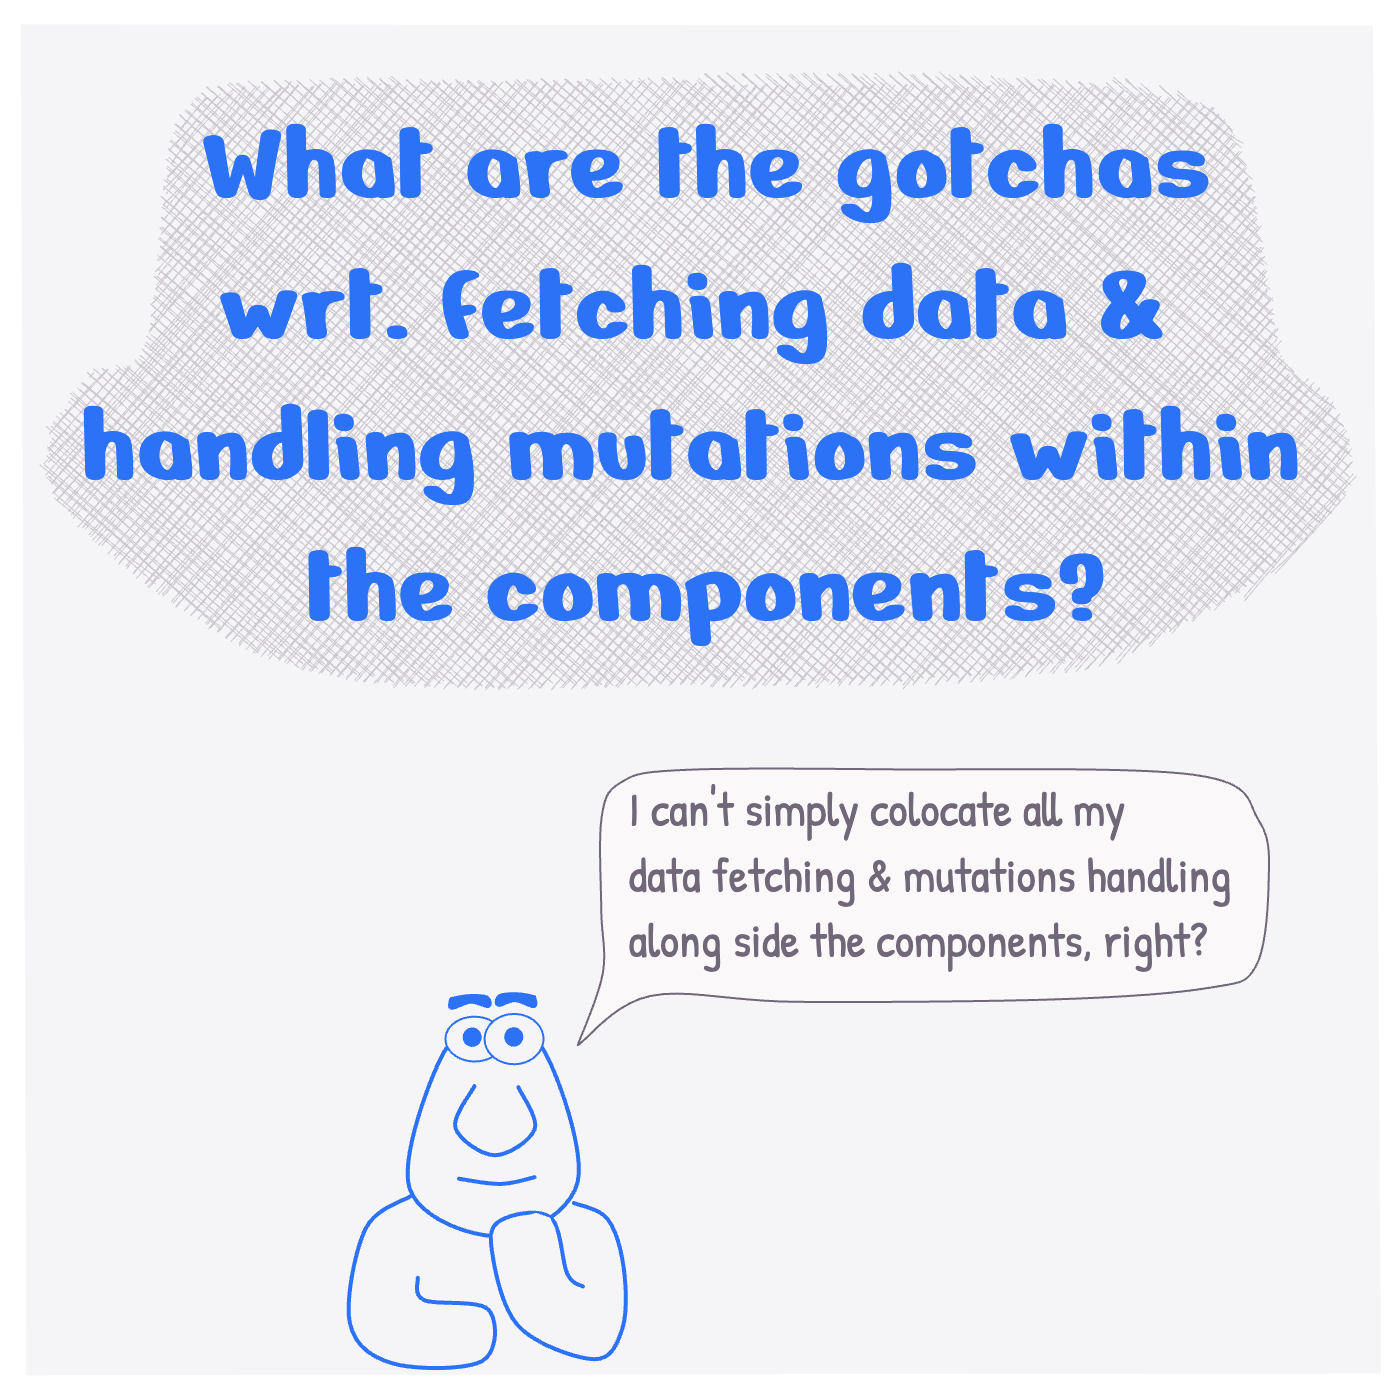 What are the gotchas wrt. fetching data and handling mutations within the components?